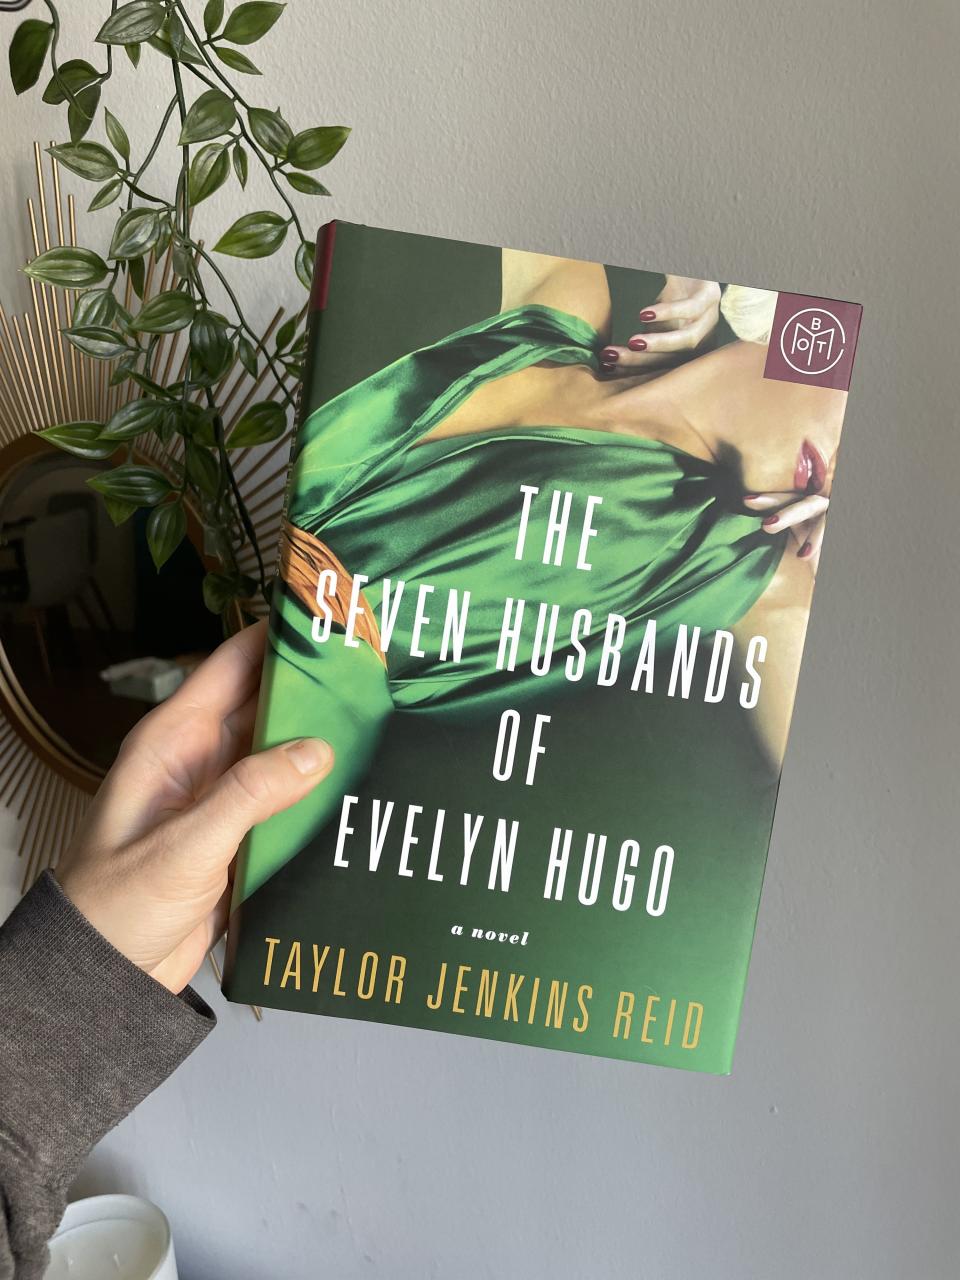 Person holds up The Seven Husbands of Evelyn Hugo by Taylor Jenkins Reid